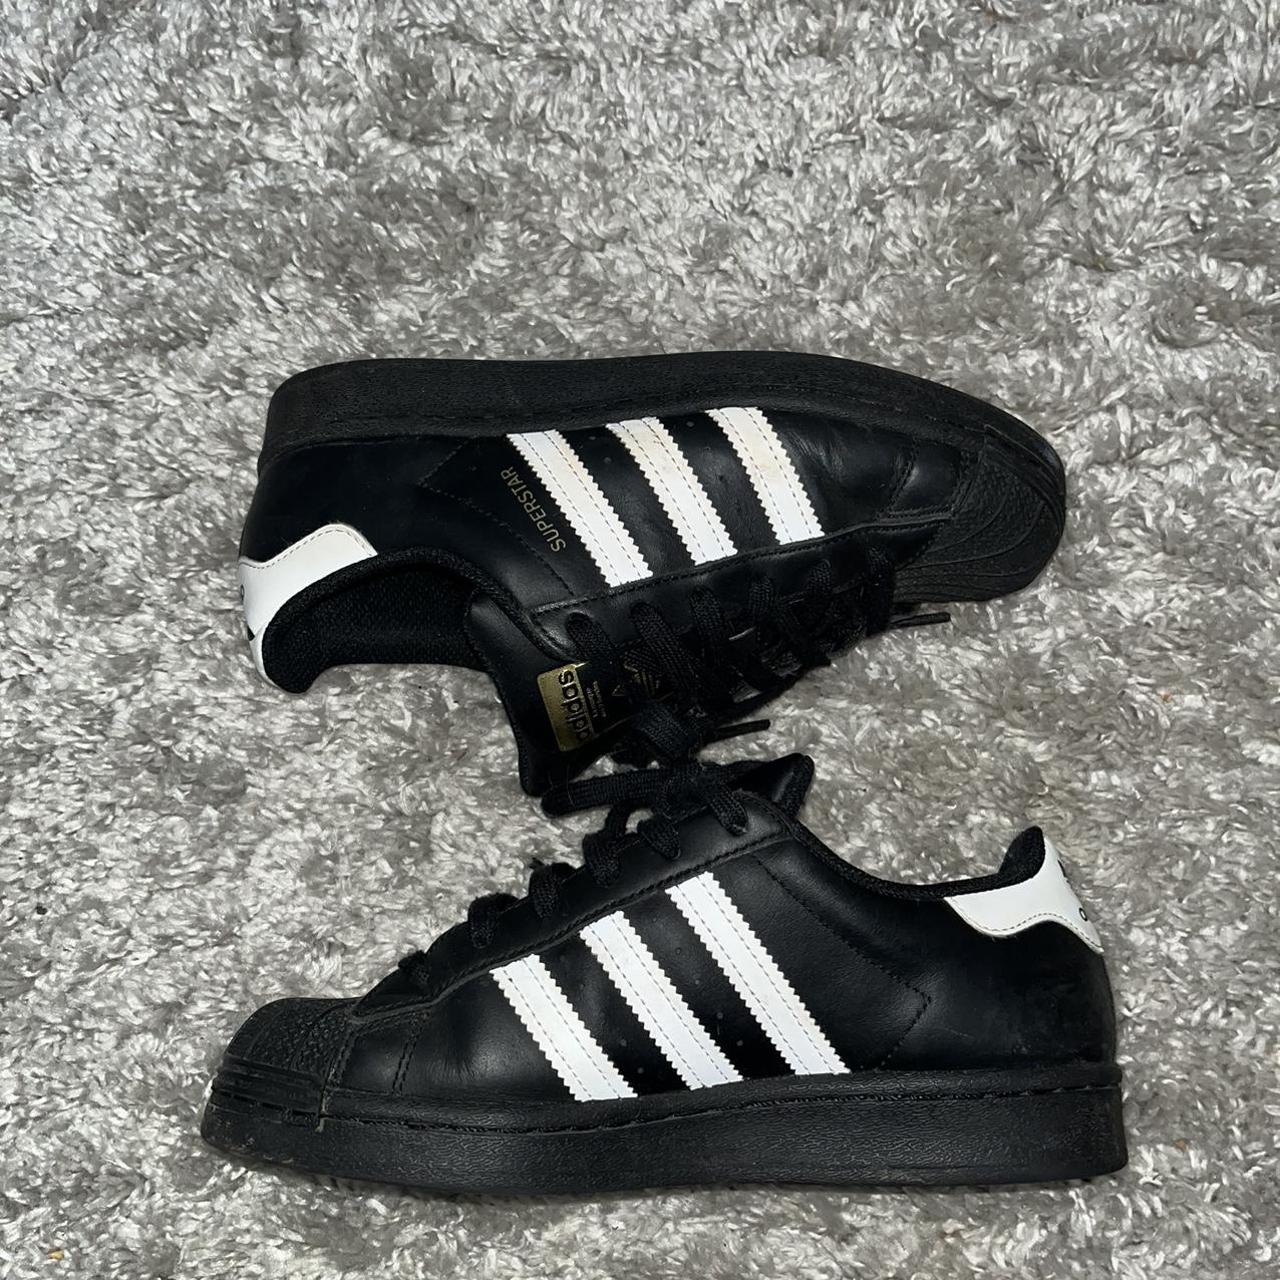 Adidas Women's Black and White Trainers | Depop